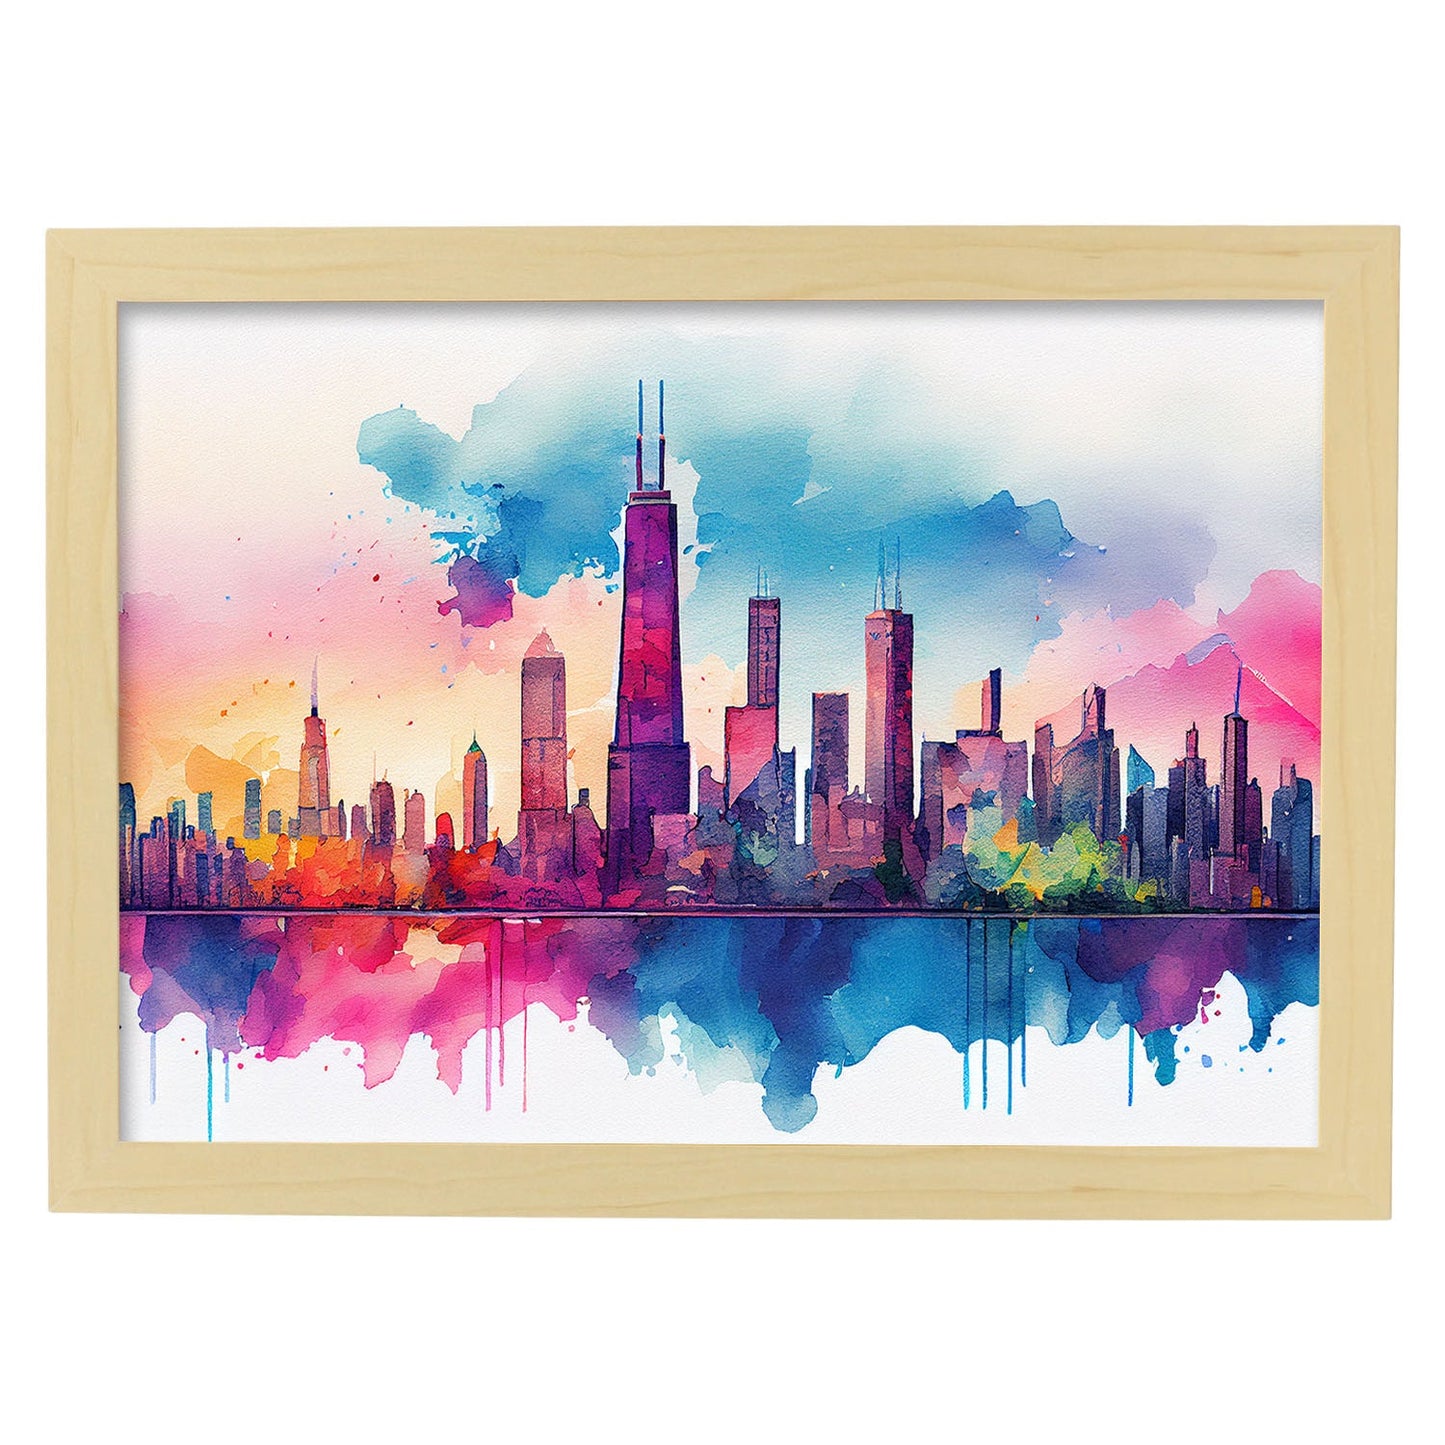 Nacnic watercolor of a skyline of the city of Chicago. Aesthetic Wall Art Prints for Bedroom or Living Room Design.-Artwork-Nacnic-A4-Marco Madera Clara-Nacnic Estudio SL